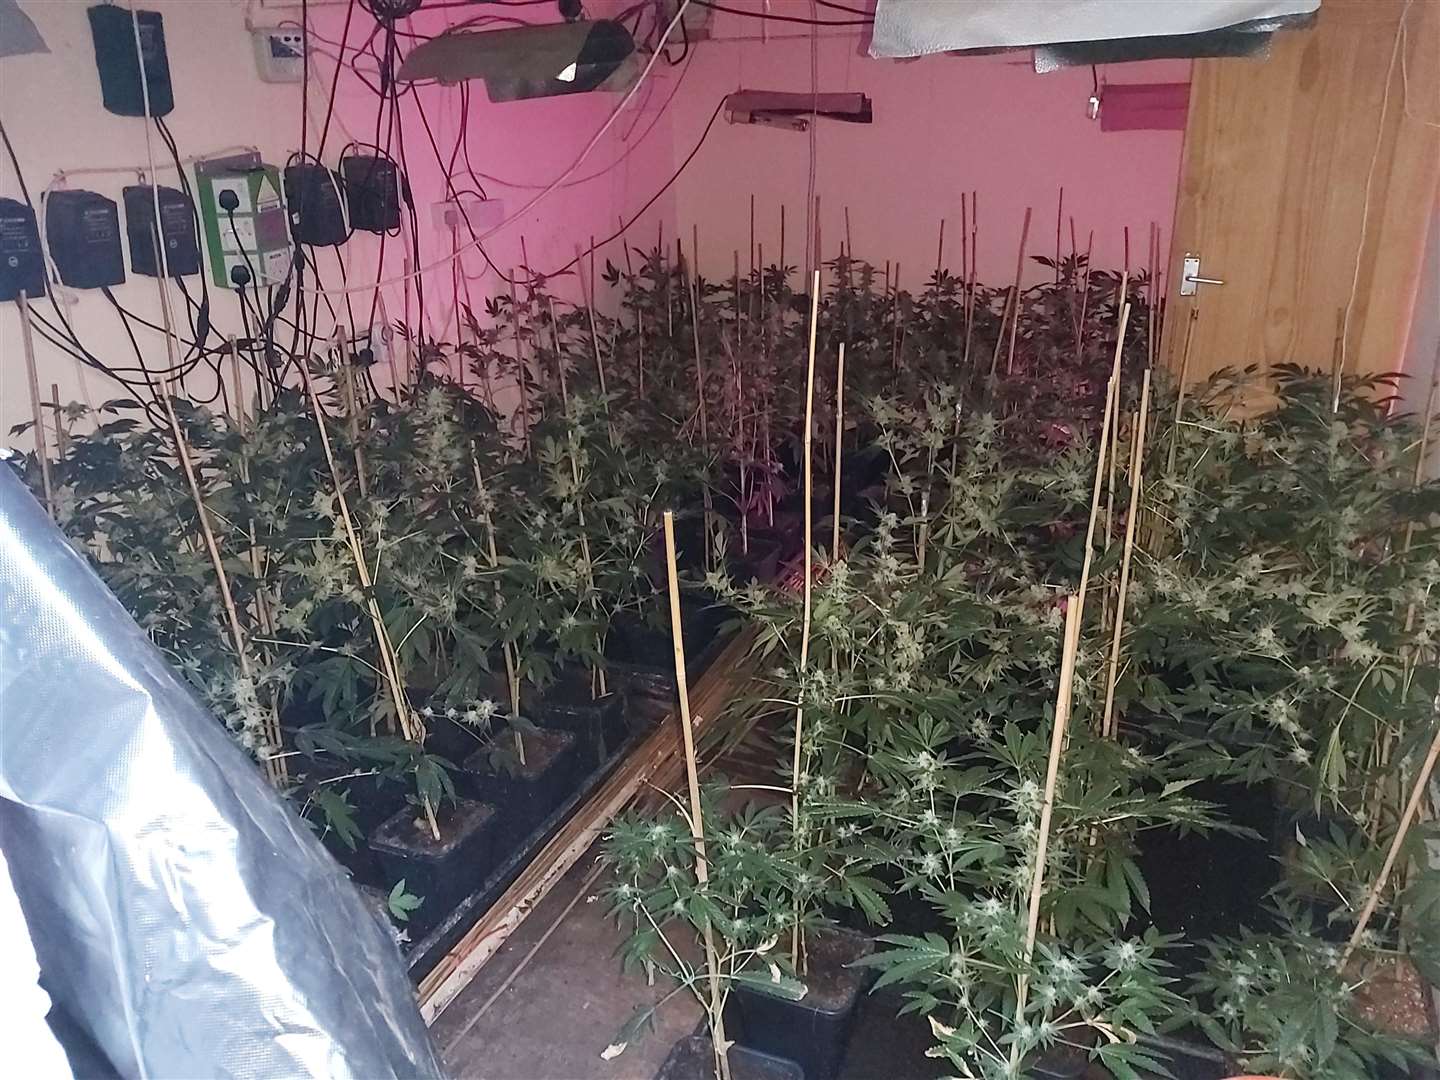 The plants were discovered in an industrial unit in Swanley. Picture: Kent Police